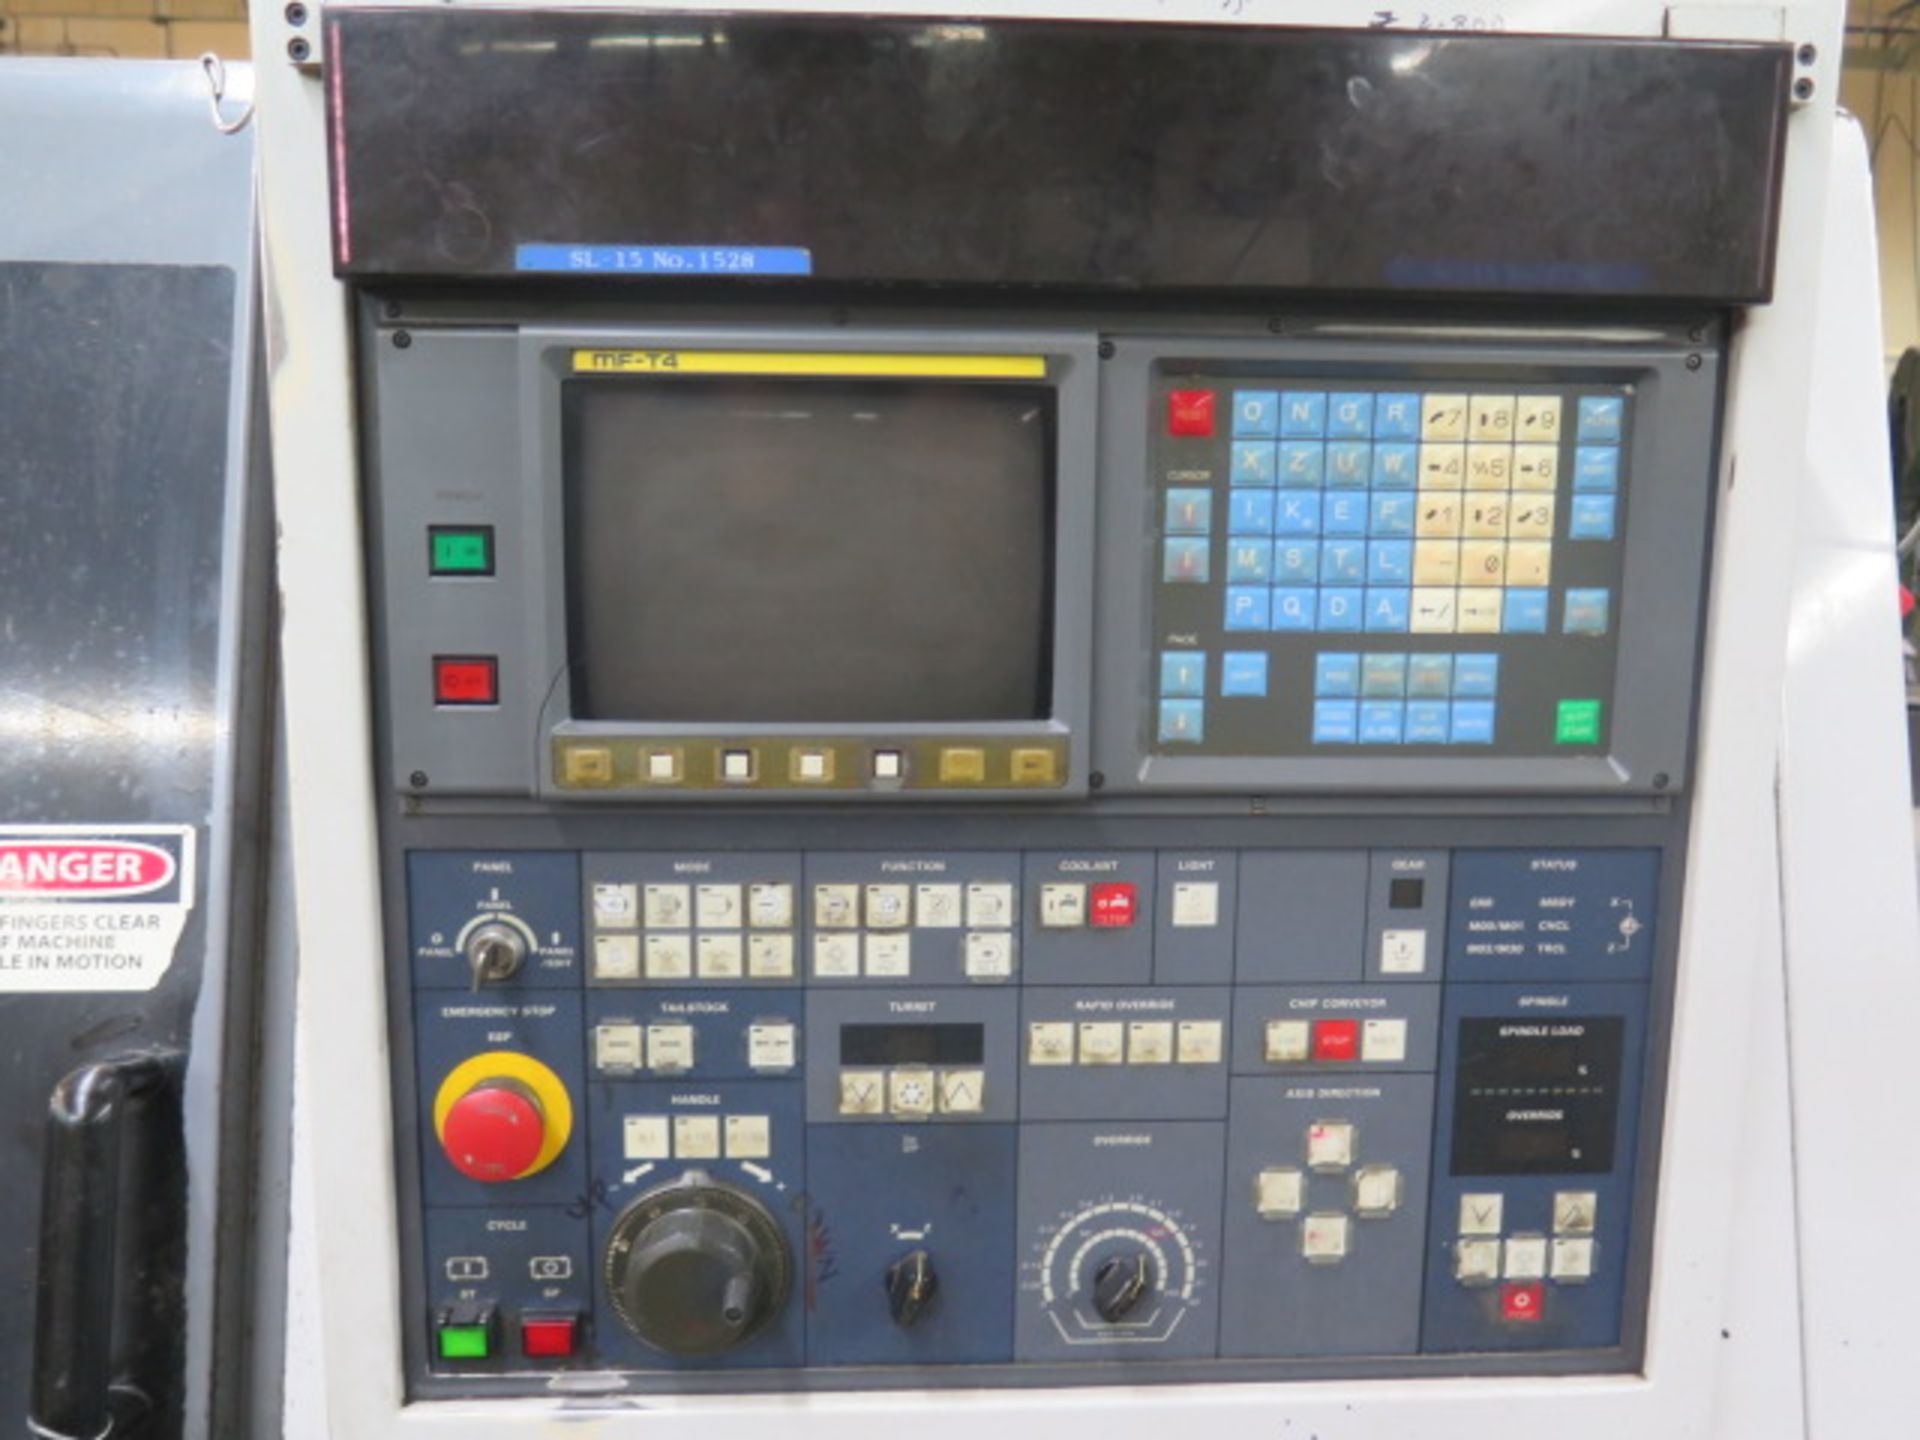 Mori Seiki SL-15 CNC Turning Center s/n 1528 w/ Fanuc MF-T4 Controls, 12-Station Turret, SOLD AS IS - Image 10 of 15